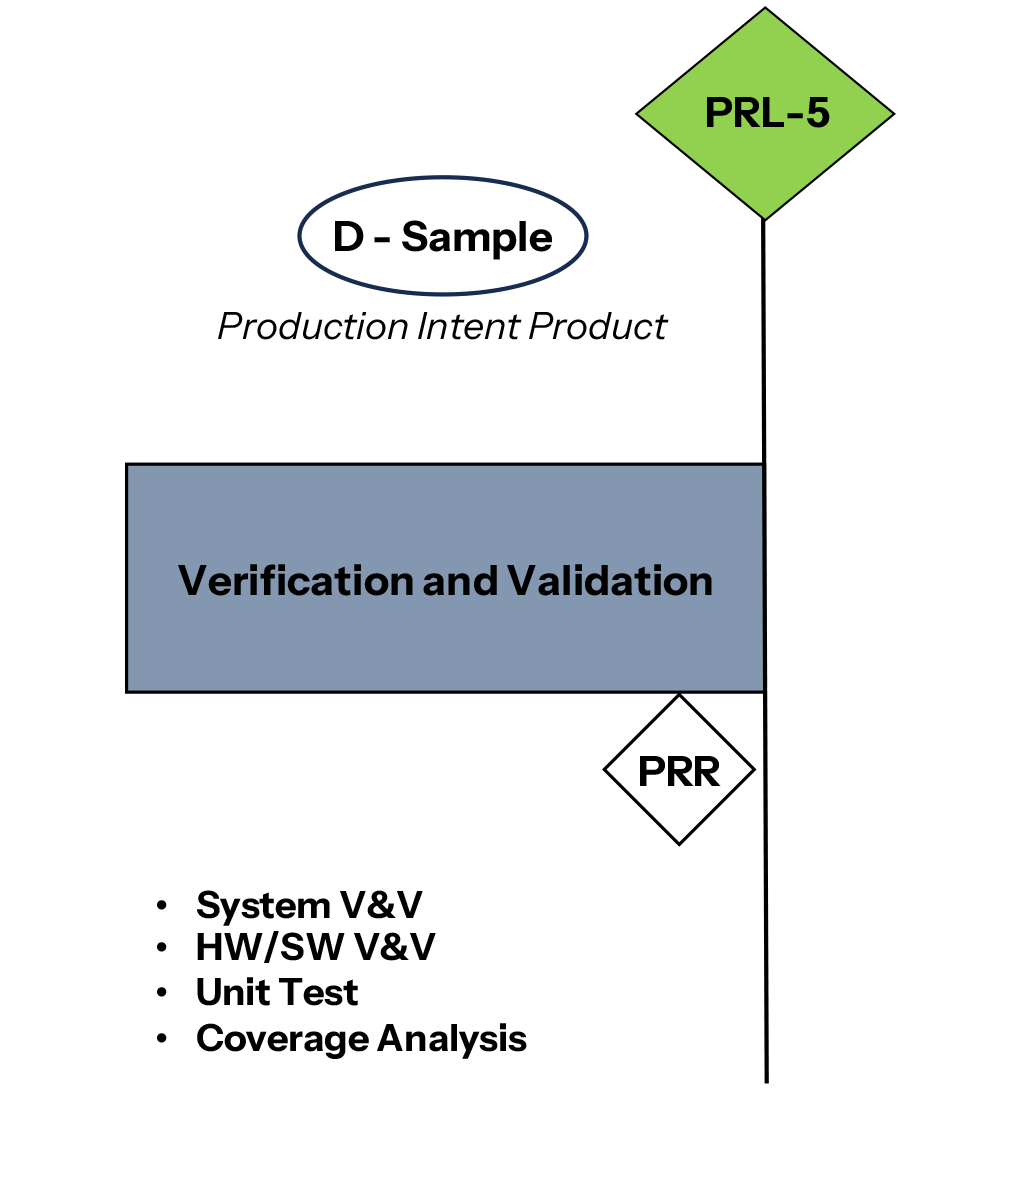 5.LHPES-Sys-Soft-Dev-webpage-graphic-Verification-and-Validation-02